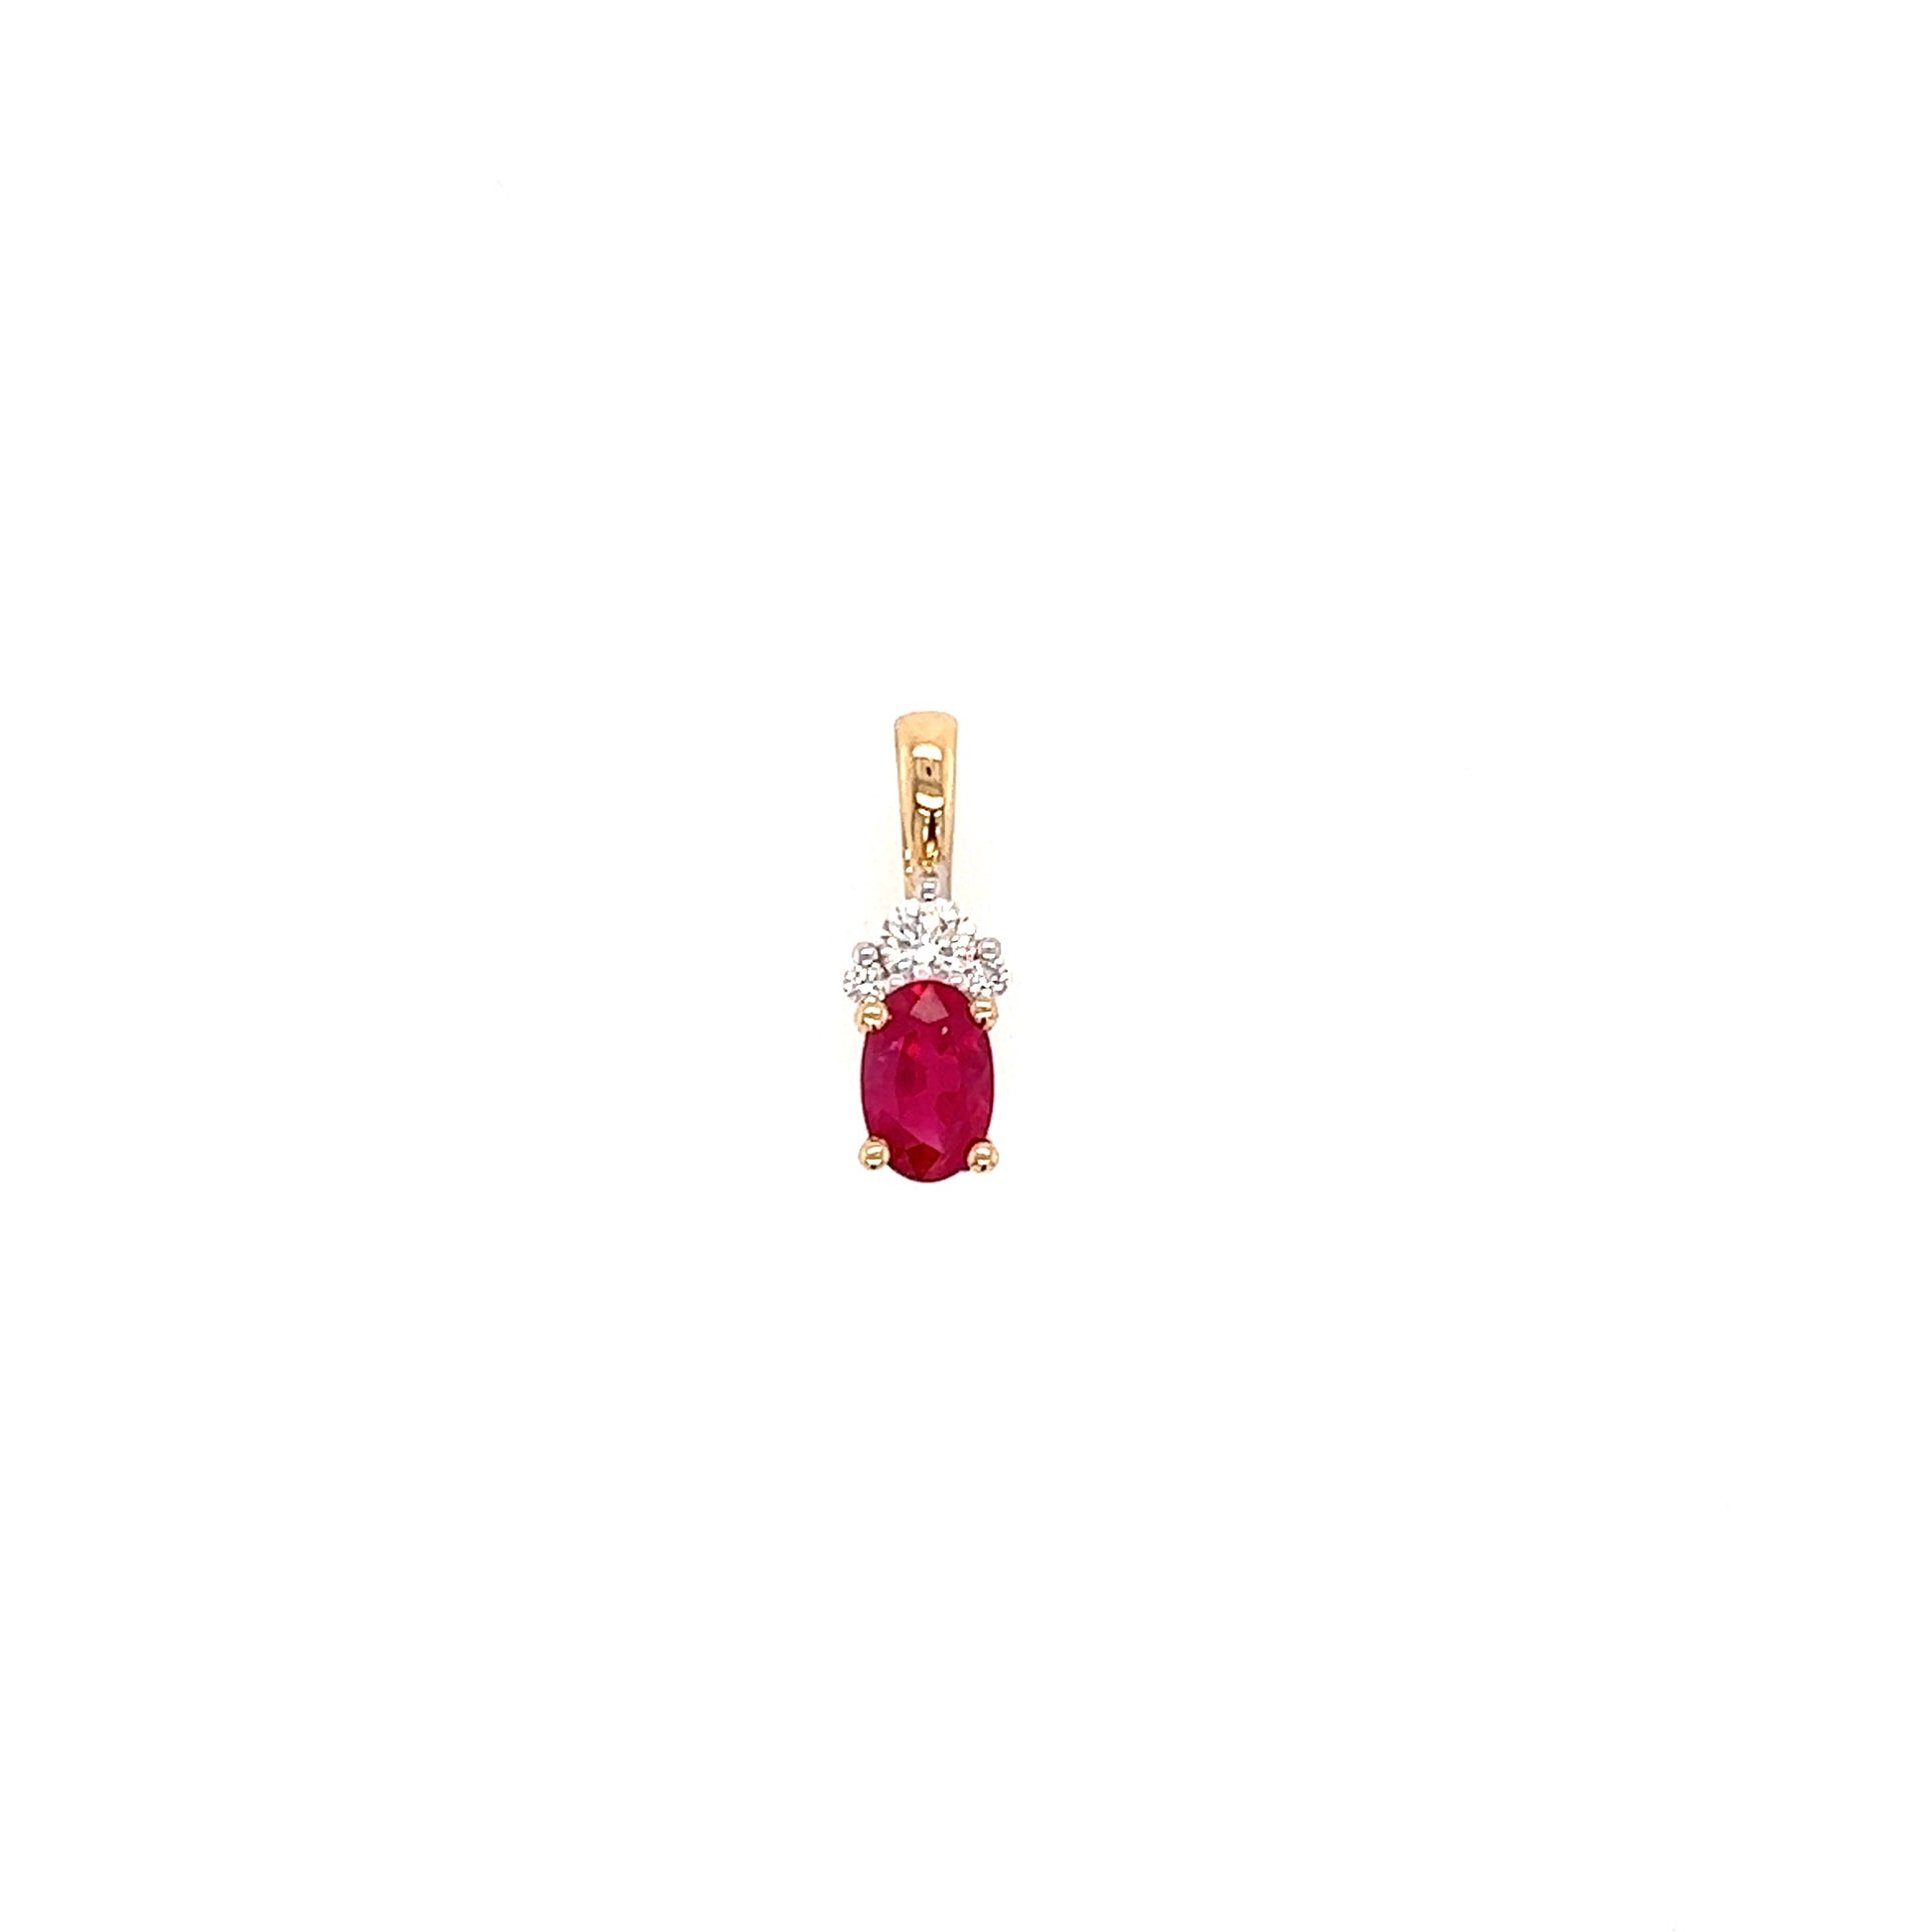 Oval Ruby Pendant with Three Accent Diamonds in 14K Yellow Gold Pendant Front View